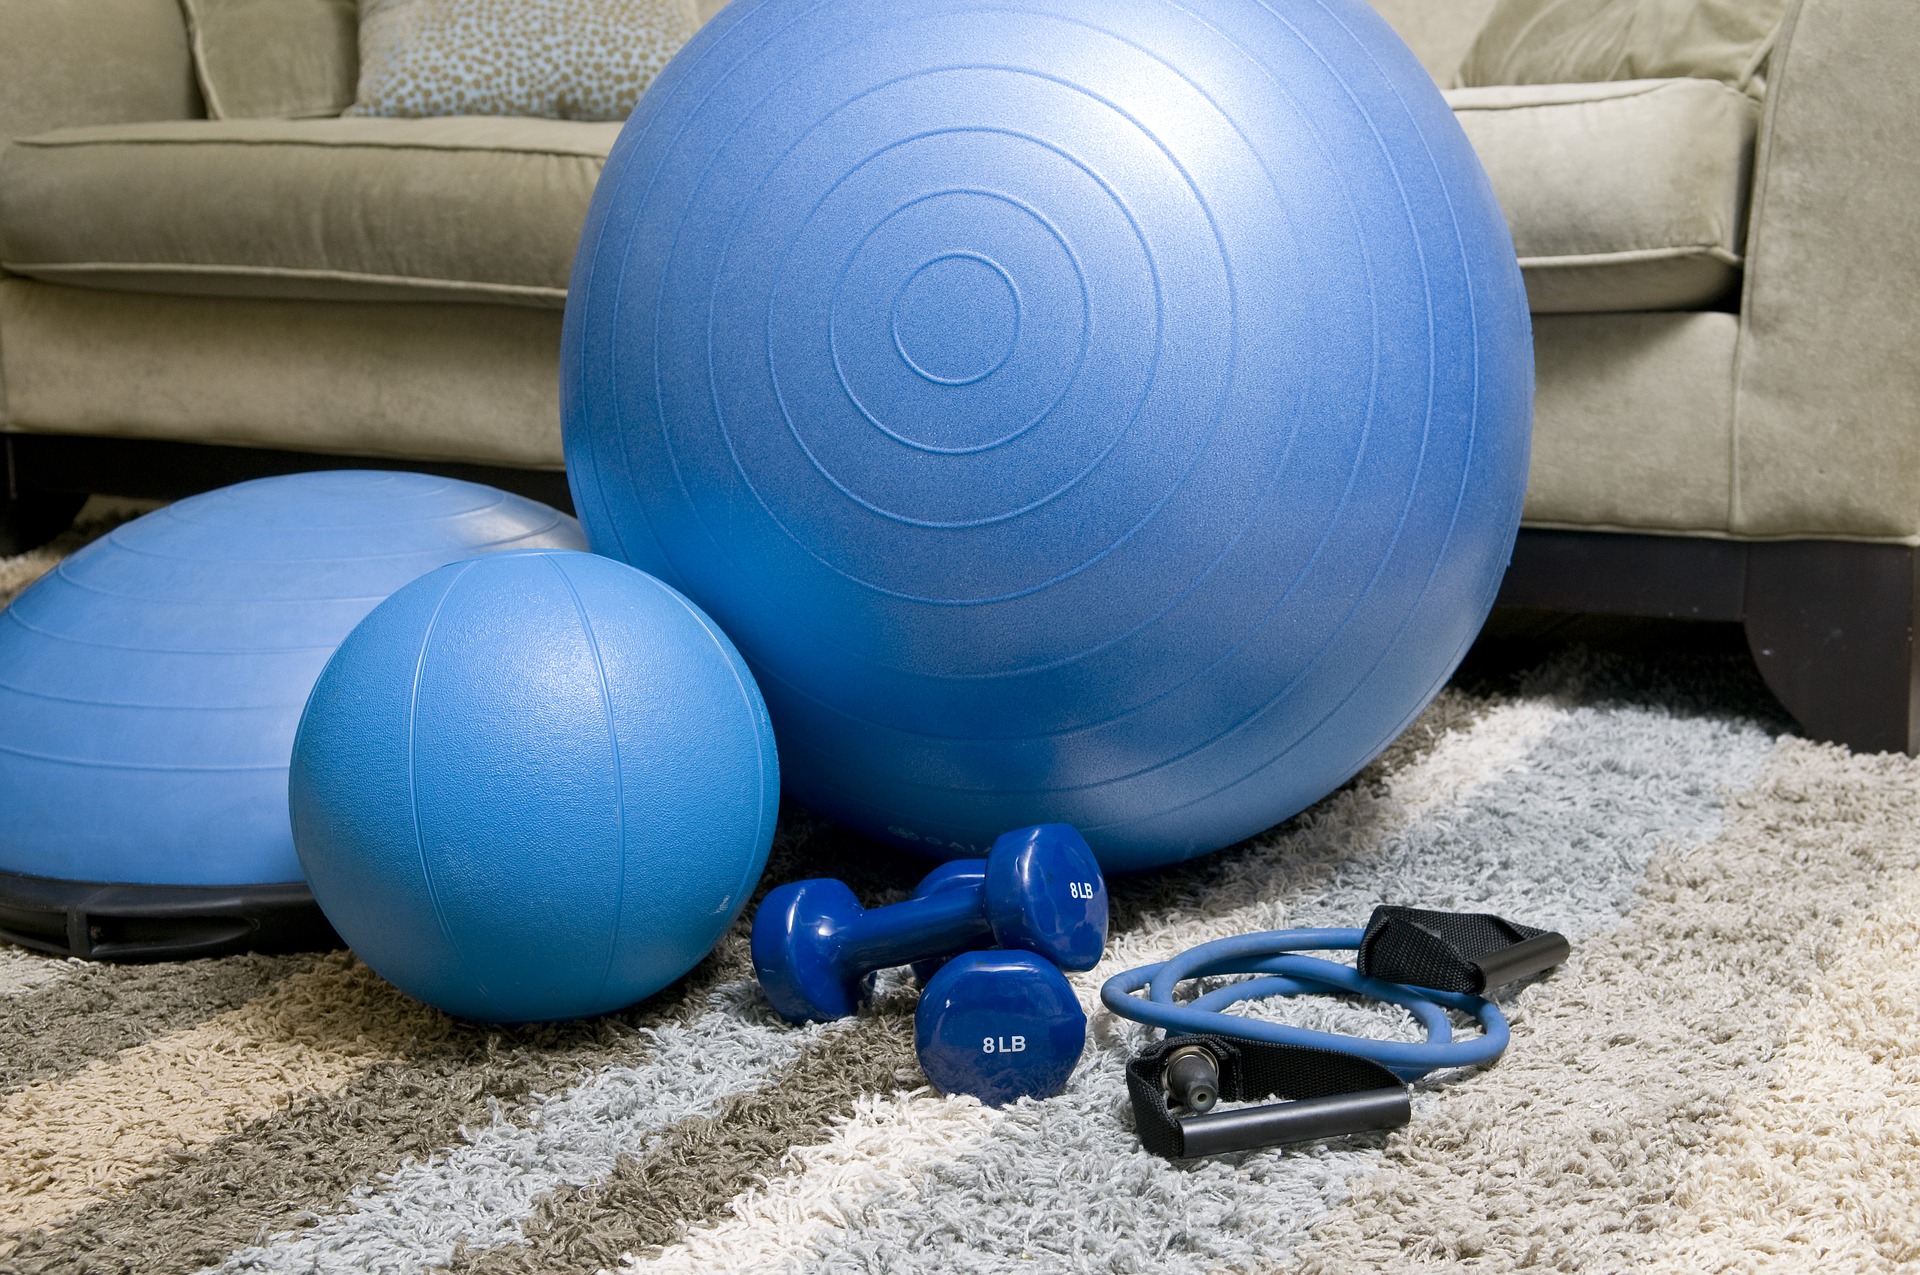 How to Stay Active at Home vs. Gym?